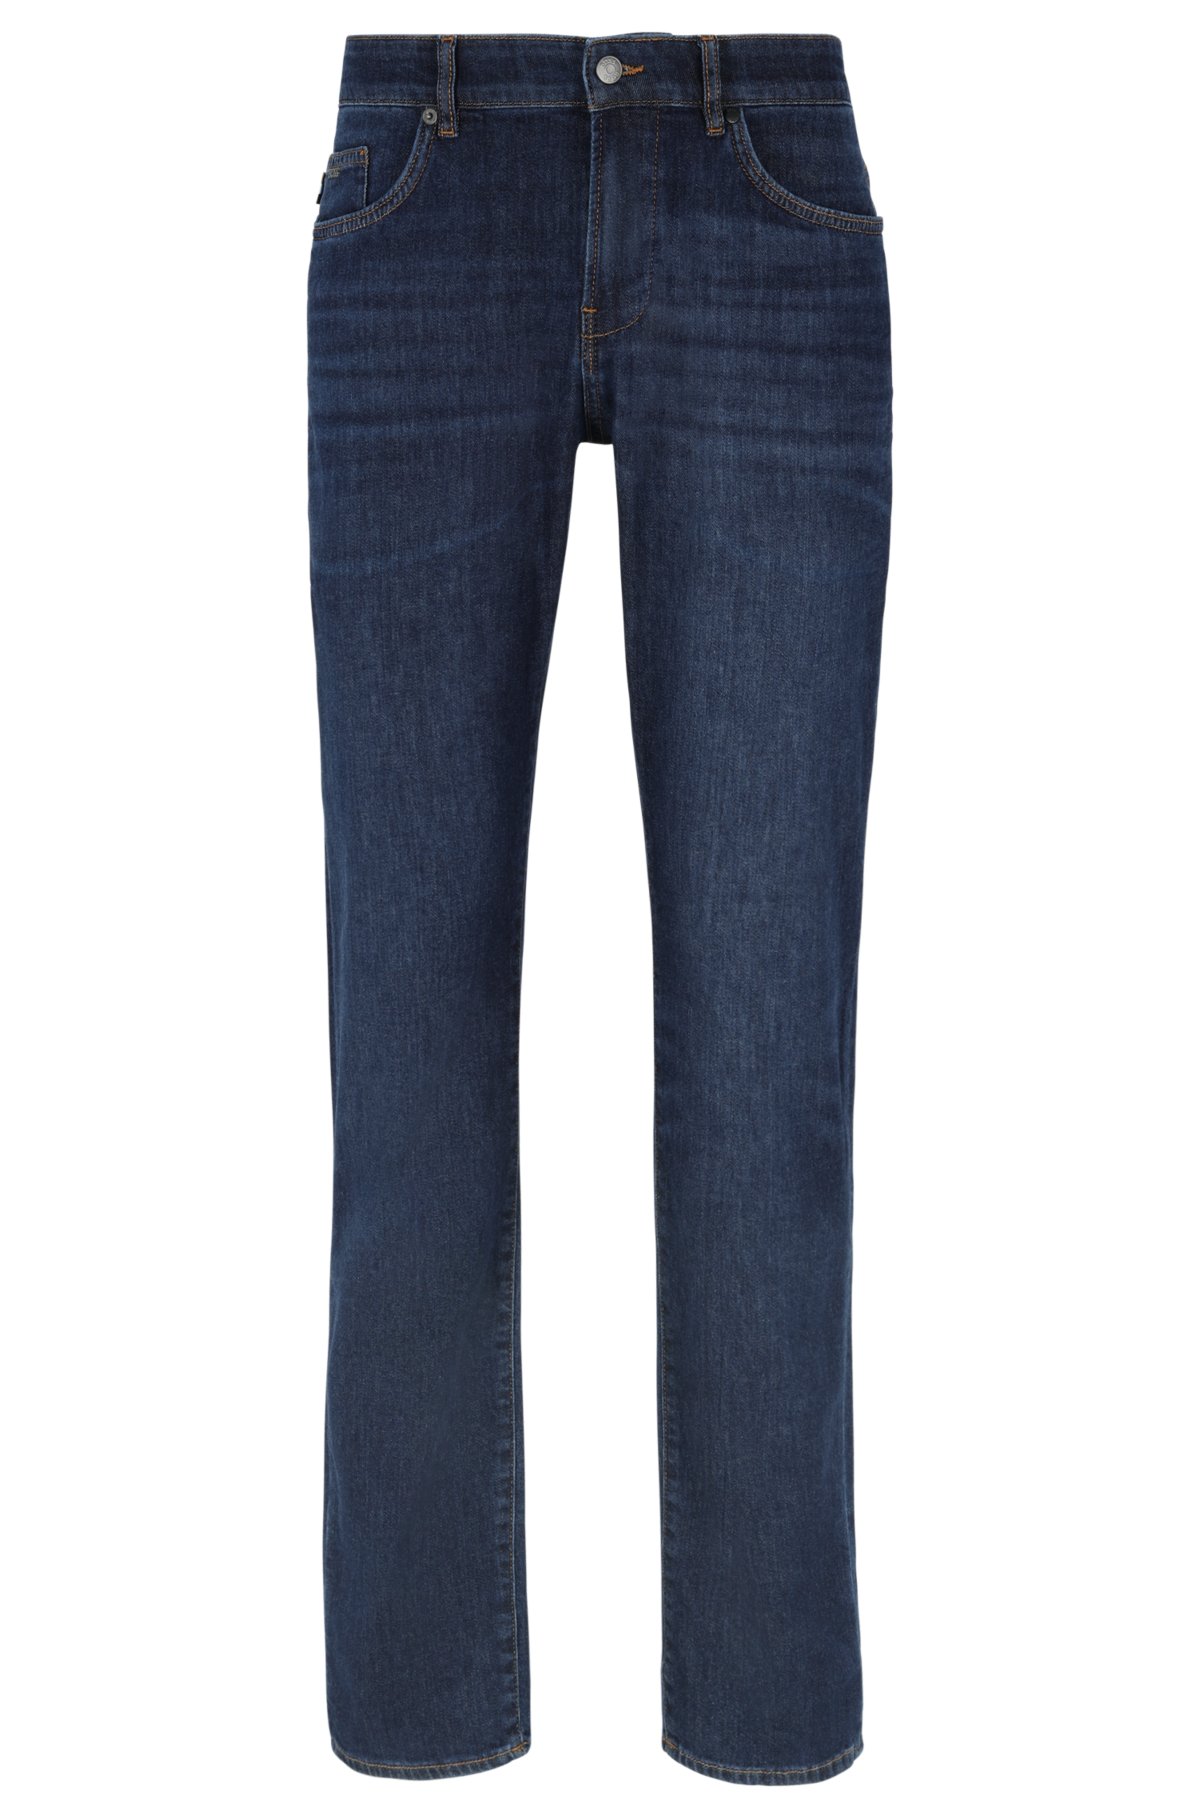 Buy BOSS Akron Relaxed-Fit Jeans in Stone Washed Denim, Blue Color Men